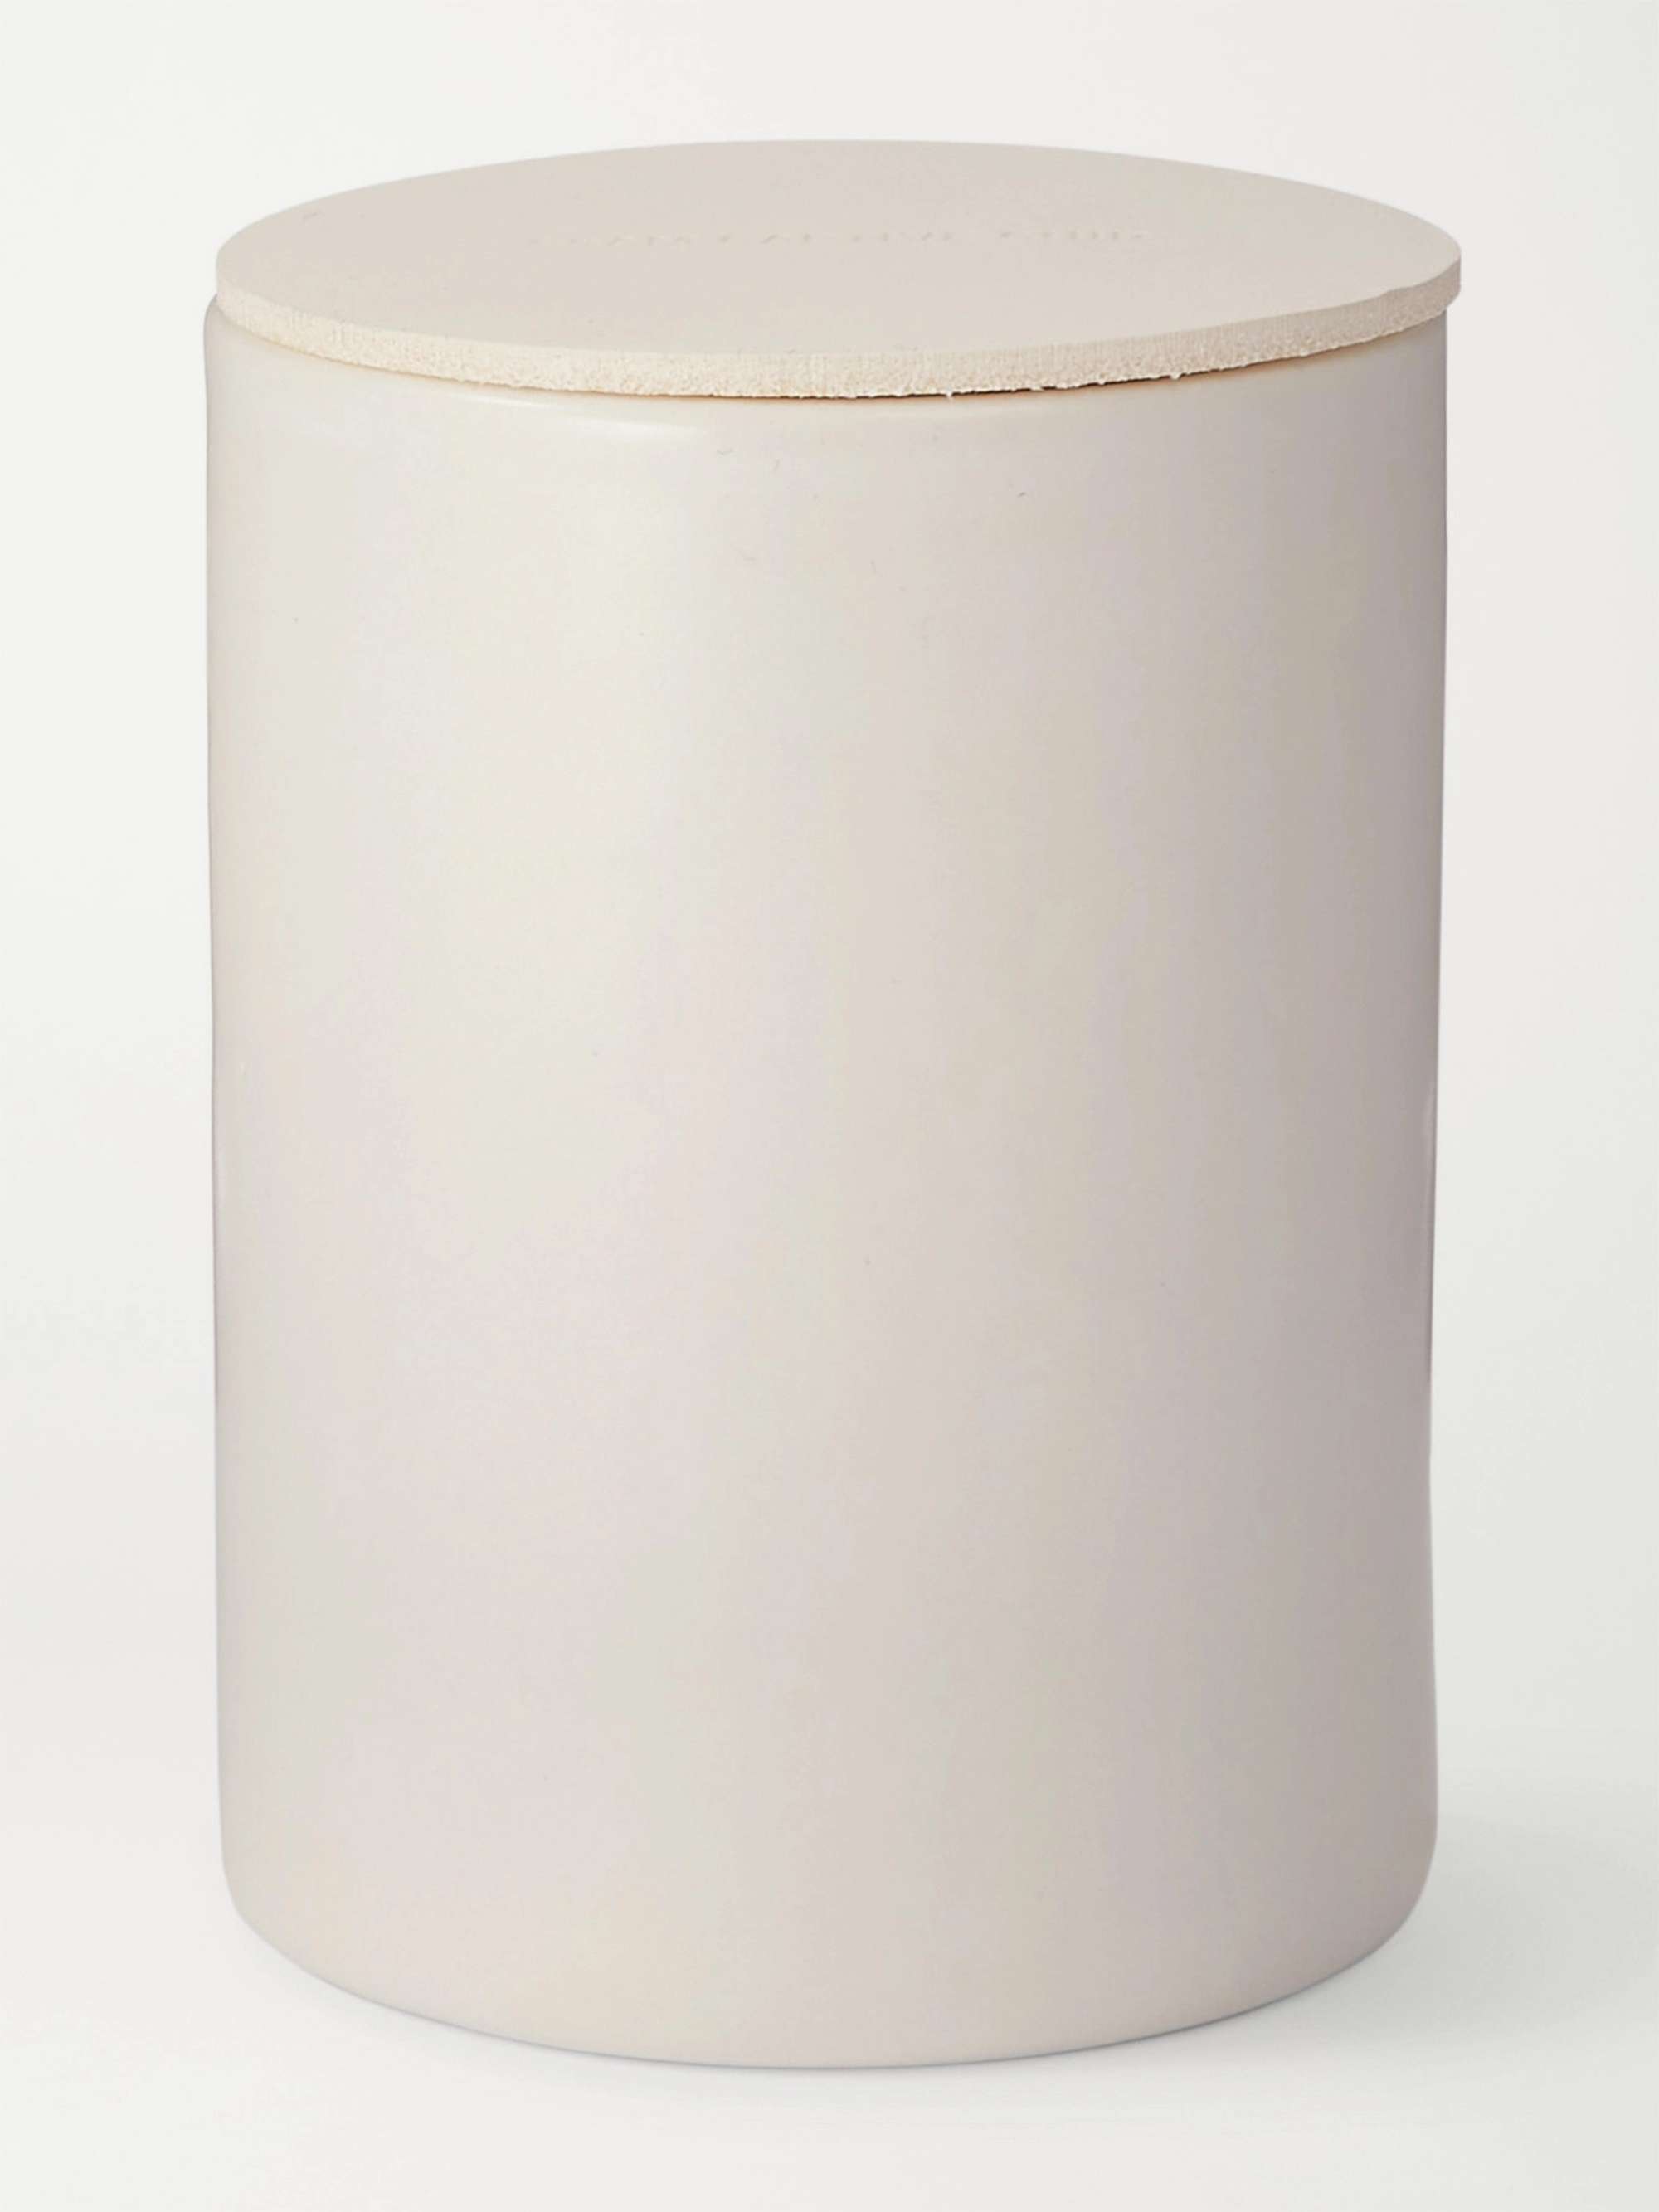 SSAM Captive Cuir Scented Candle, 240g